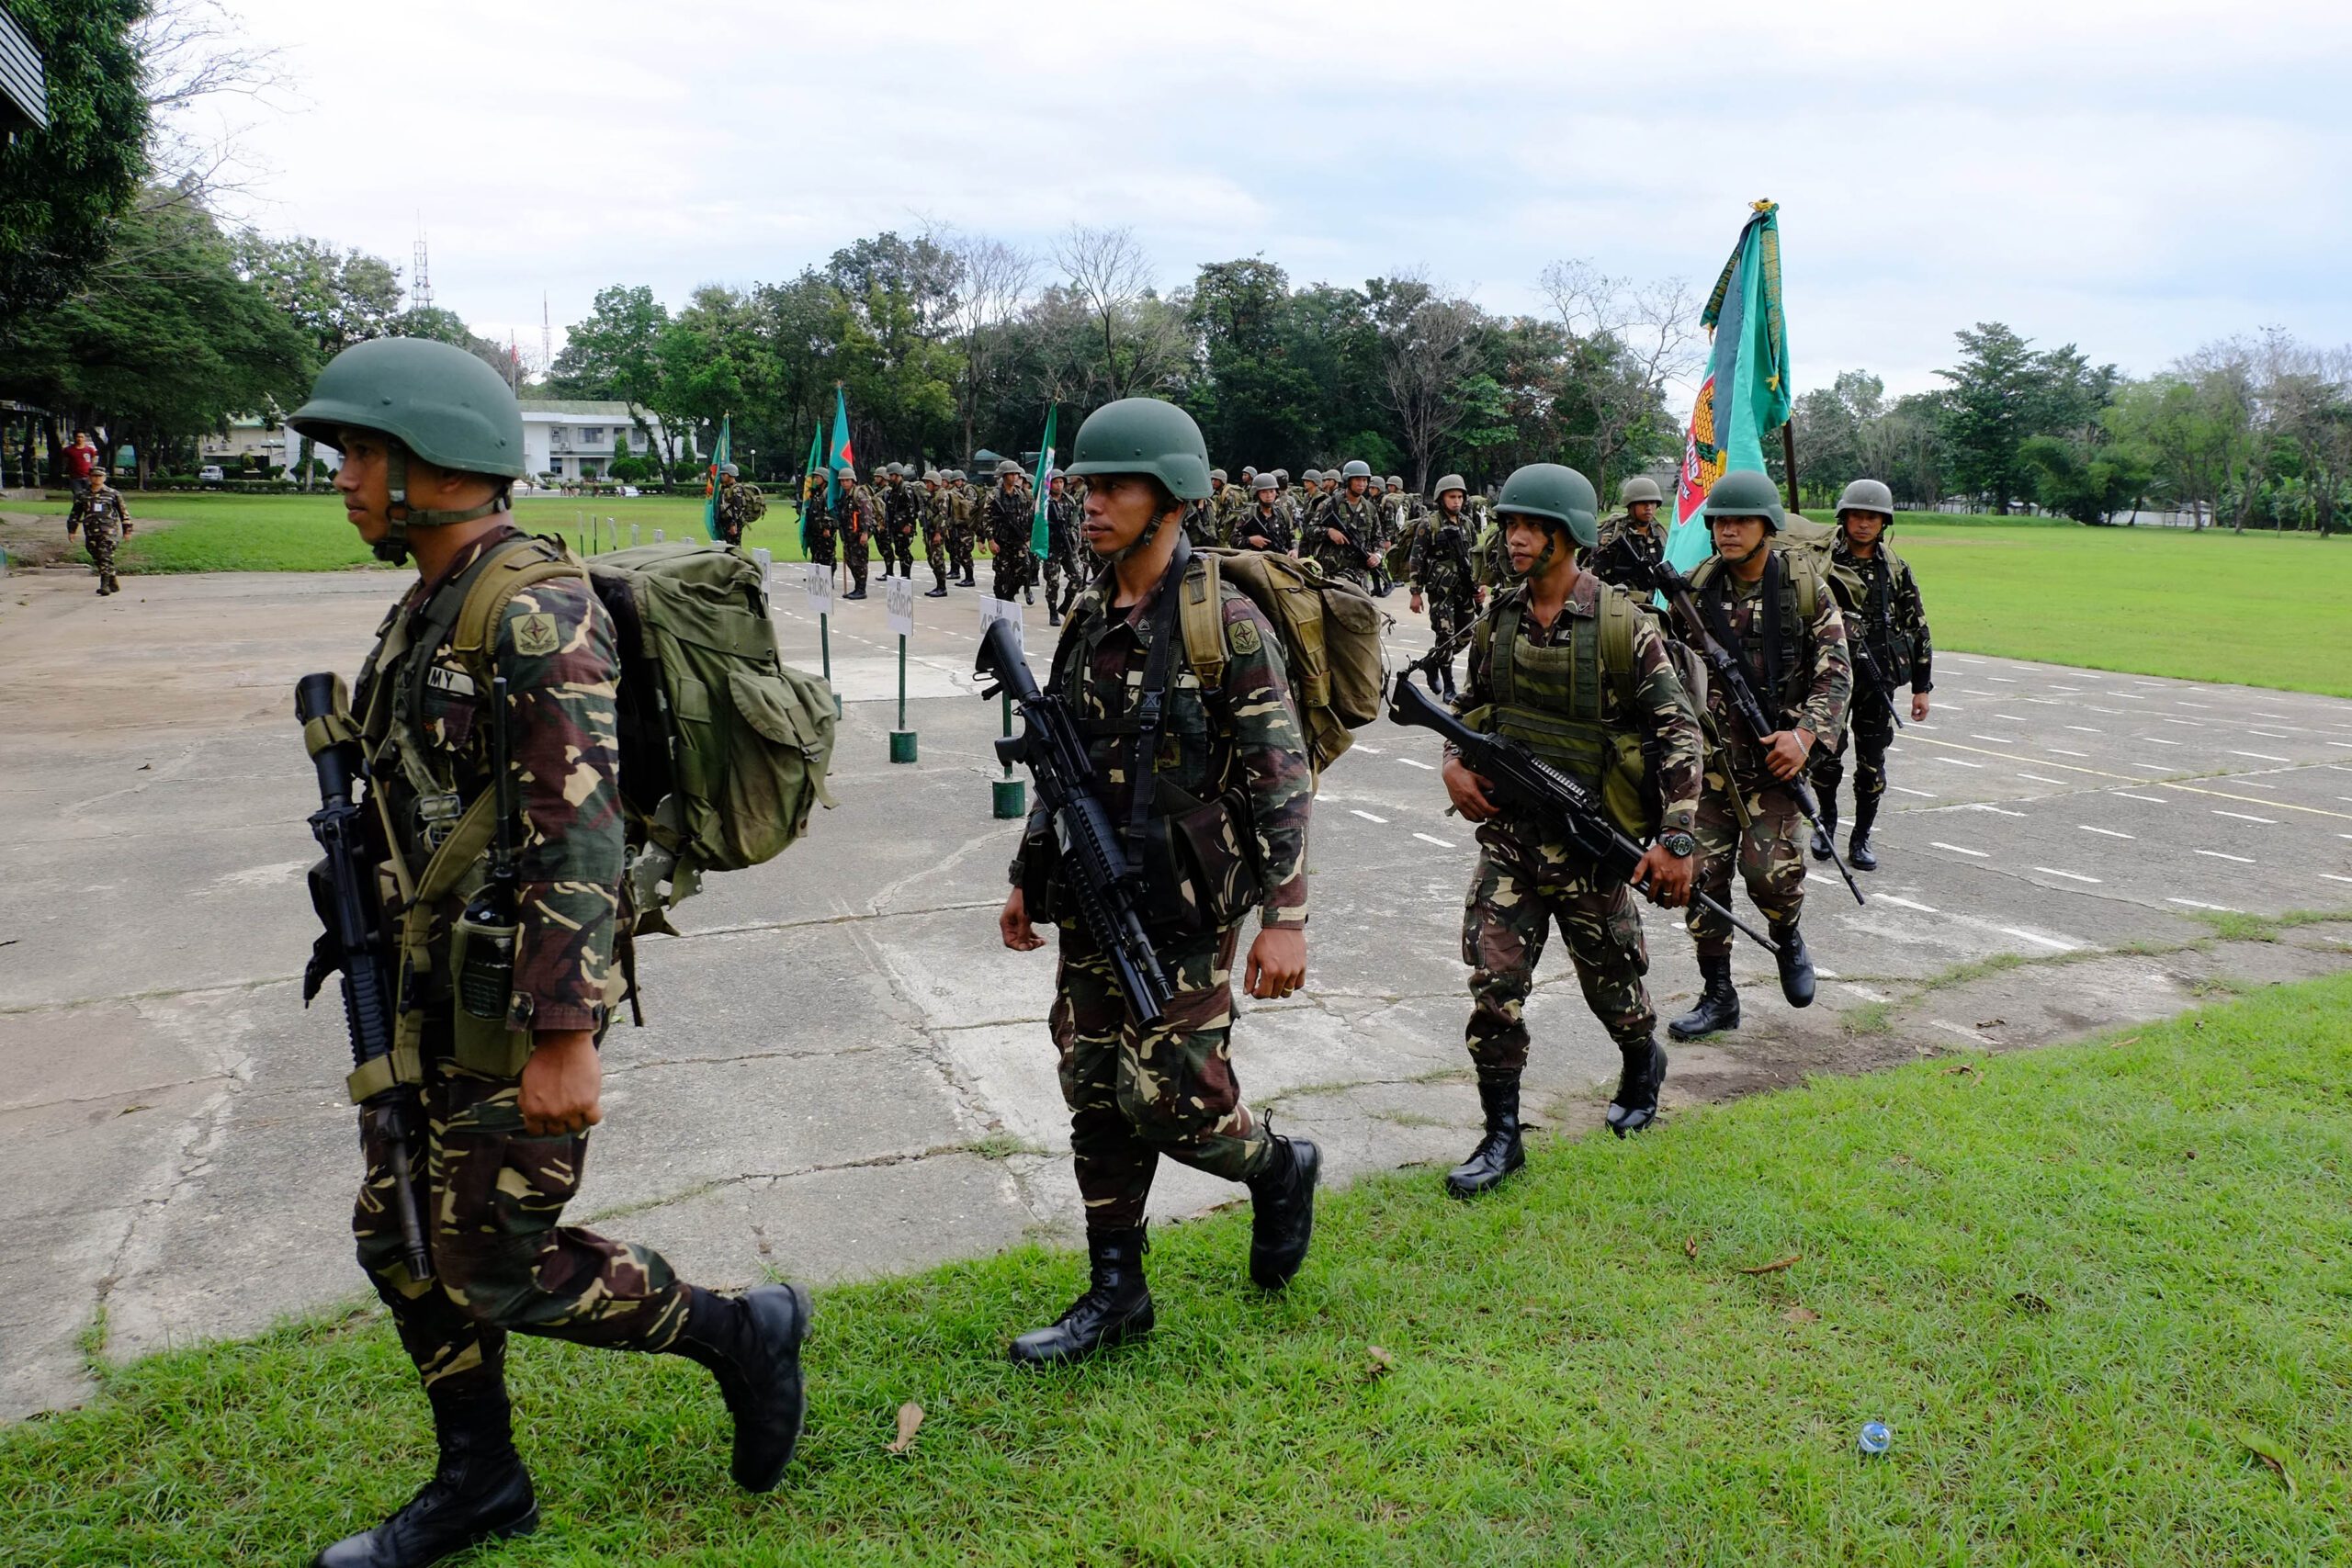 Military’s 2022 plan: New army division vs Abu Sayyaf in Sulu